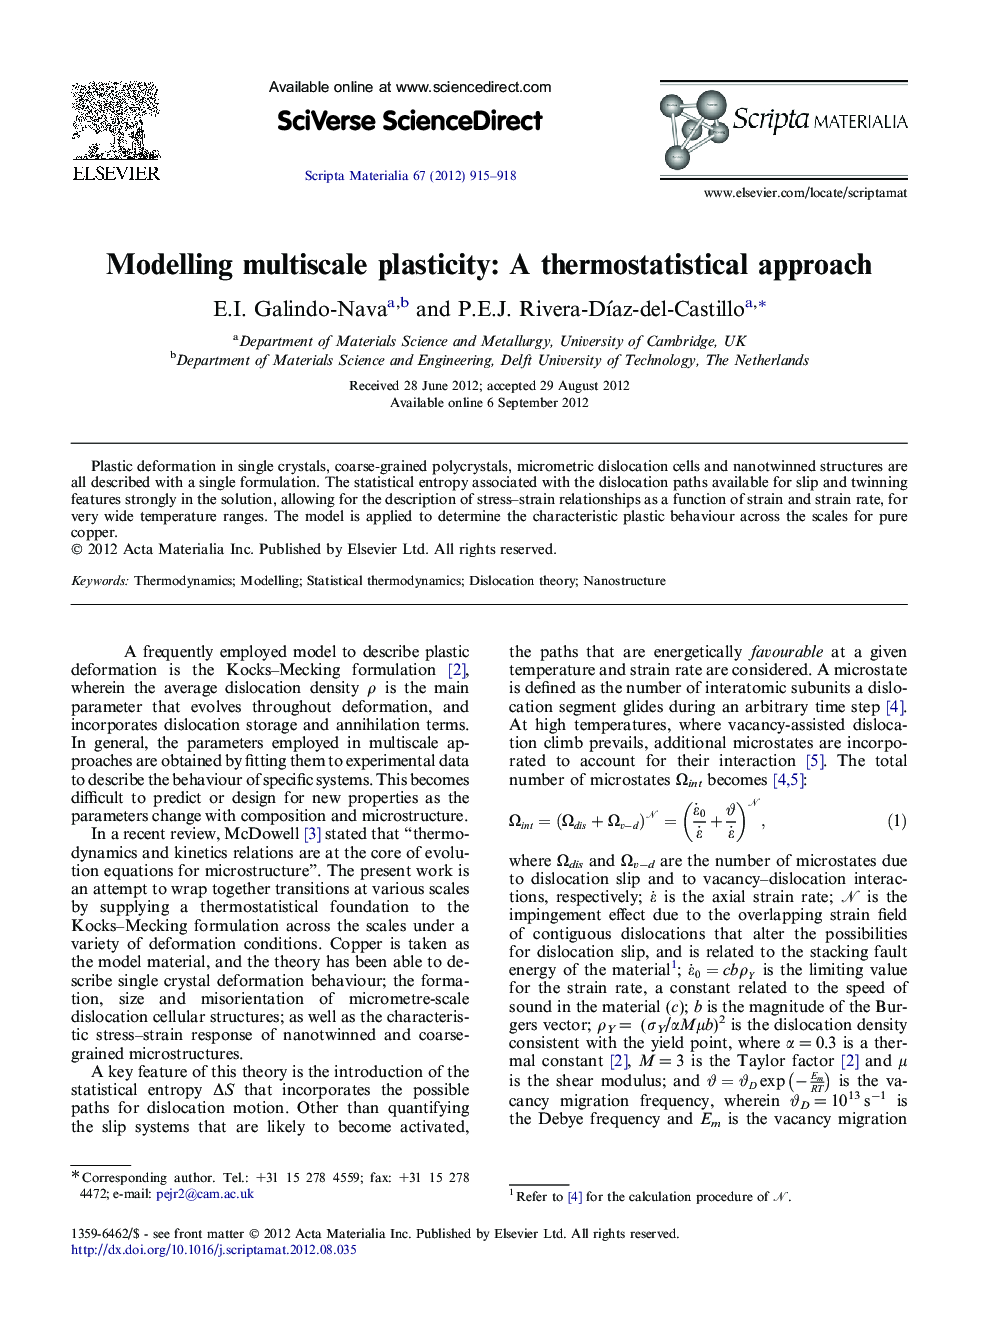 Modelling multiscale plasticity: A thermostatistical approach